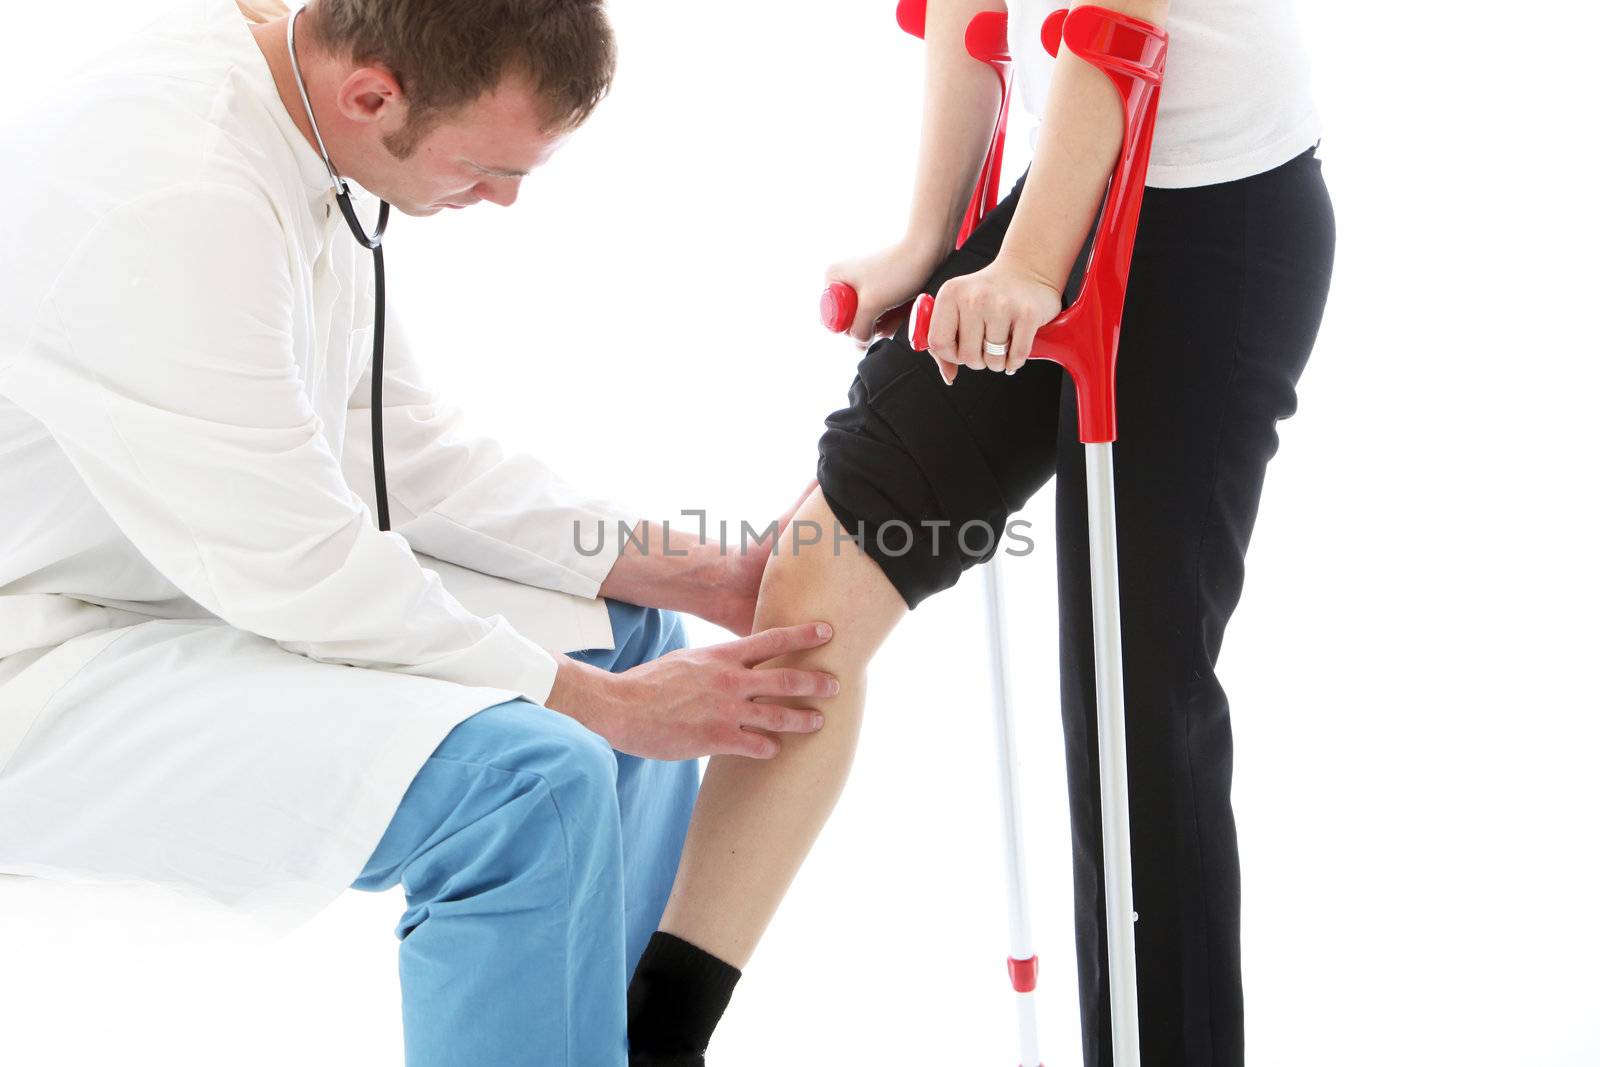 Orthopaedic surgeon sitting examining the knee of a female patient on crutches following surgery for a joint injury